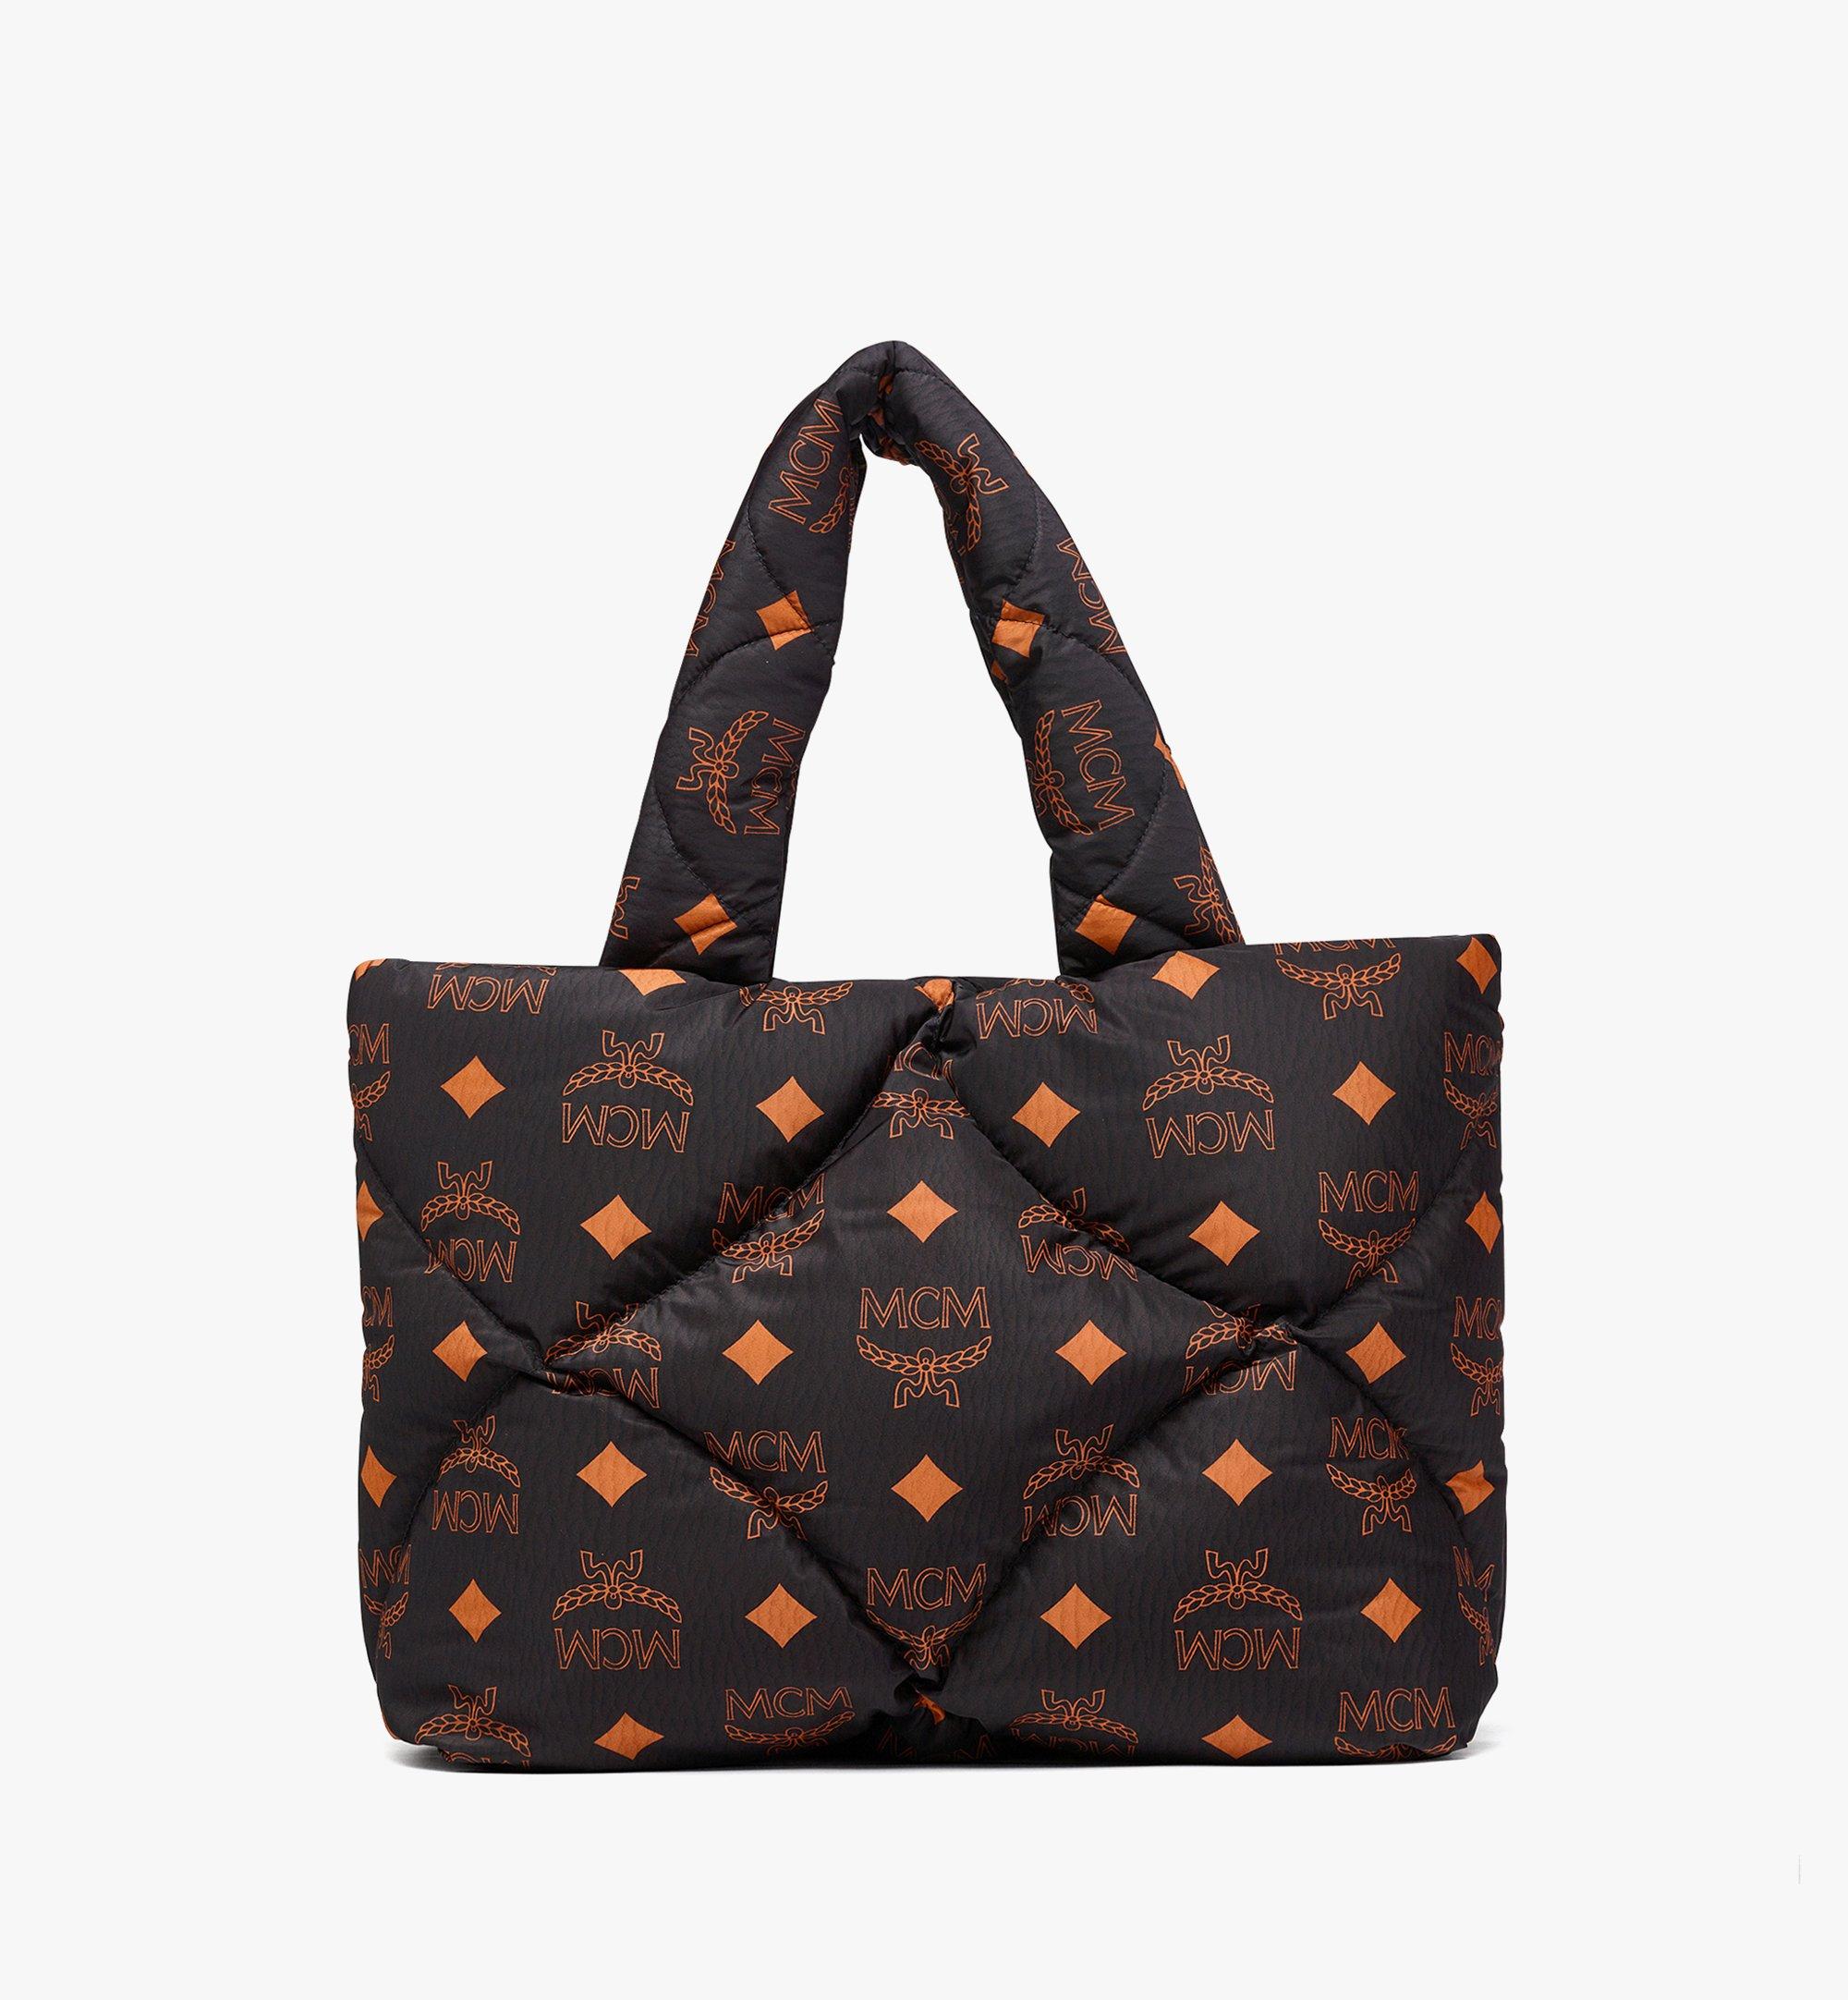 MCM München Quilted Tote in Maxi Monogram Nylon